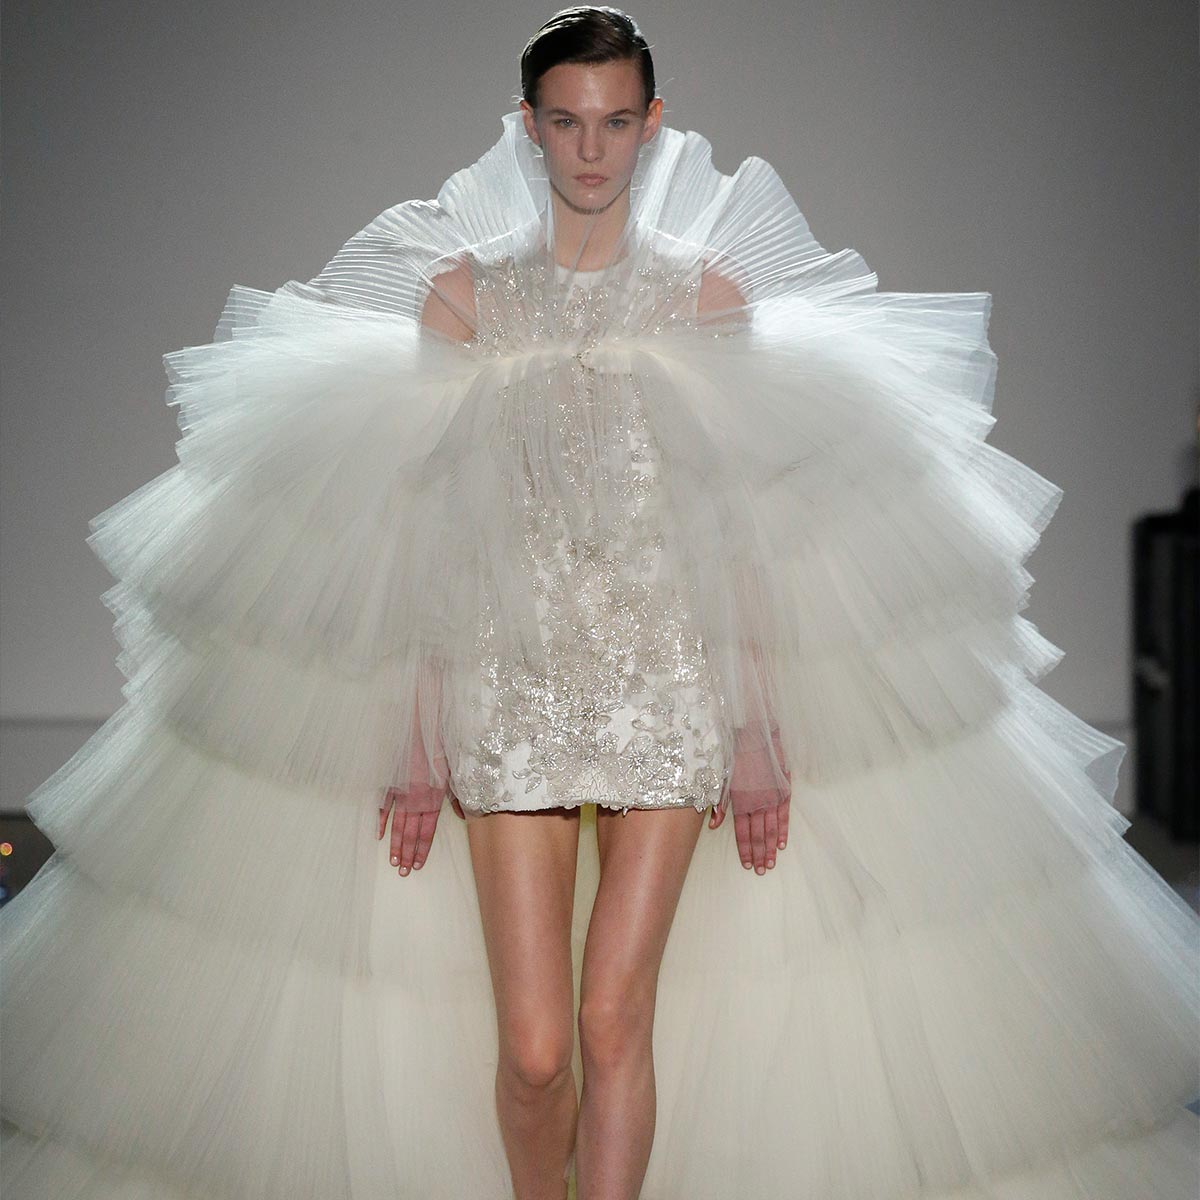 The Most Ridiculous Wedding Dresses of All Time